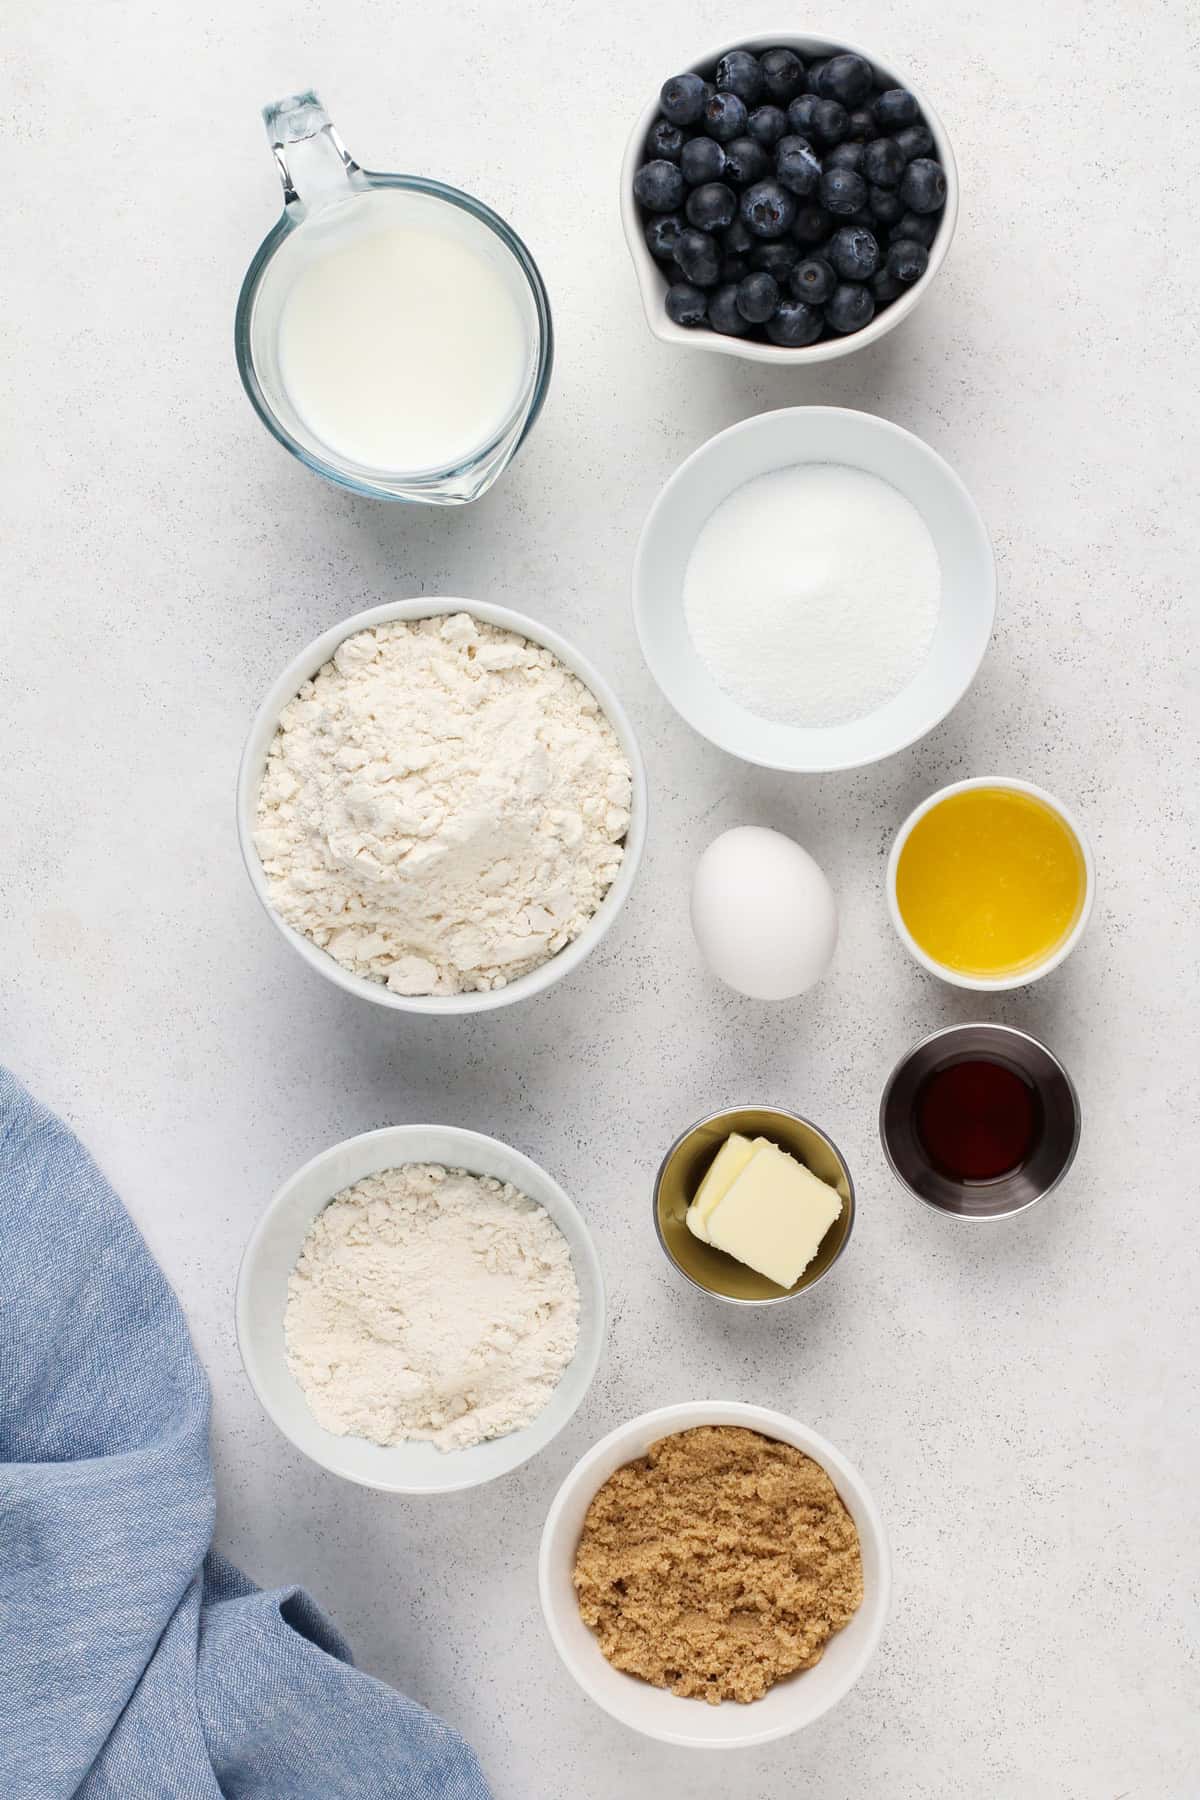 Ingredients for bisquick blueberry muffins arranged on a light-colored countertop.